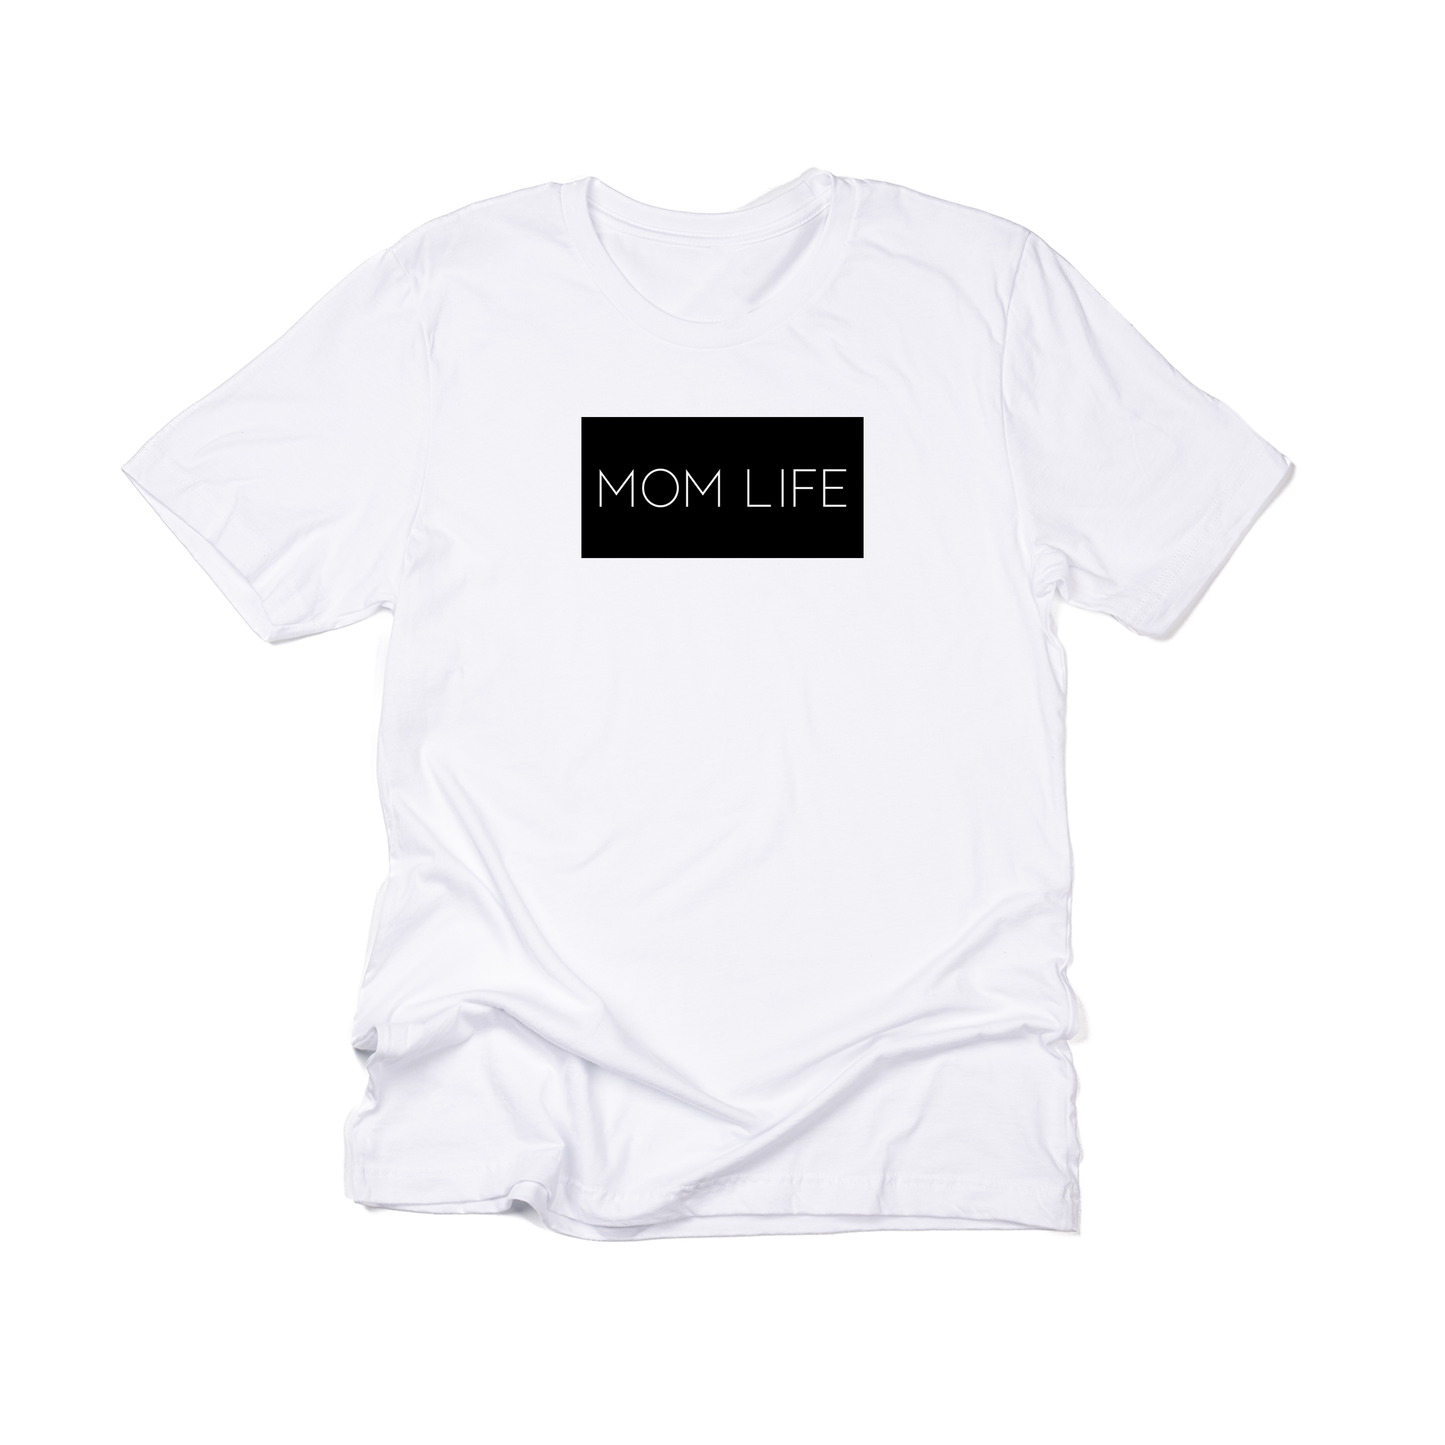 Mom Life (Boxed Collection, Black Box/White Text, Across Front) - Tee (White)